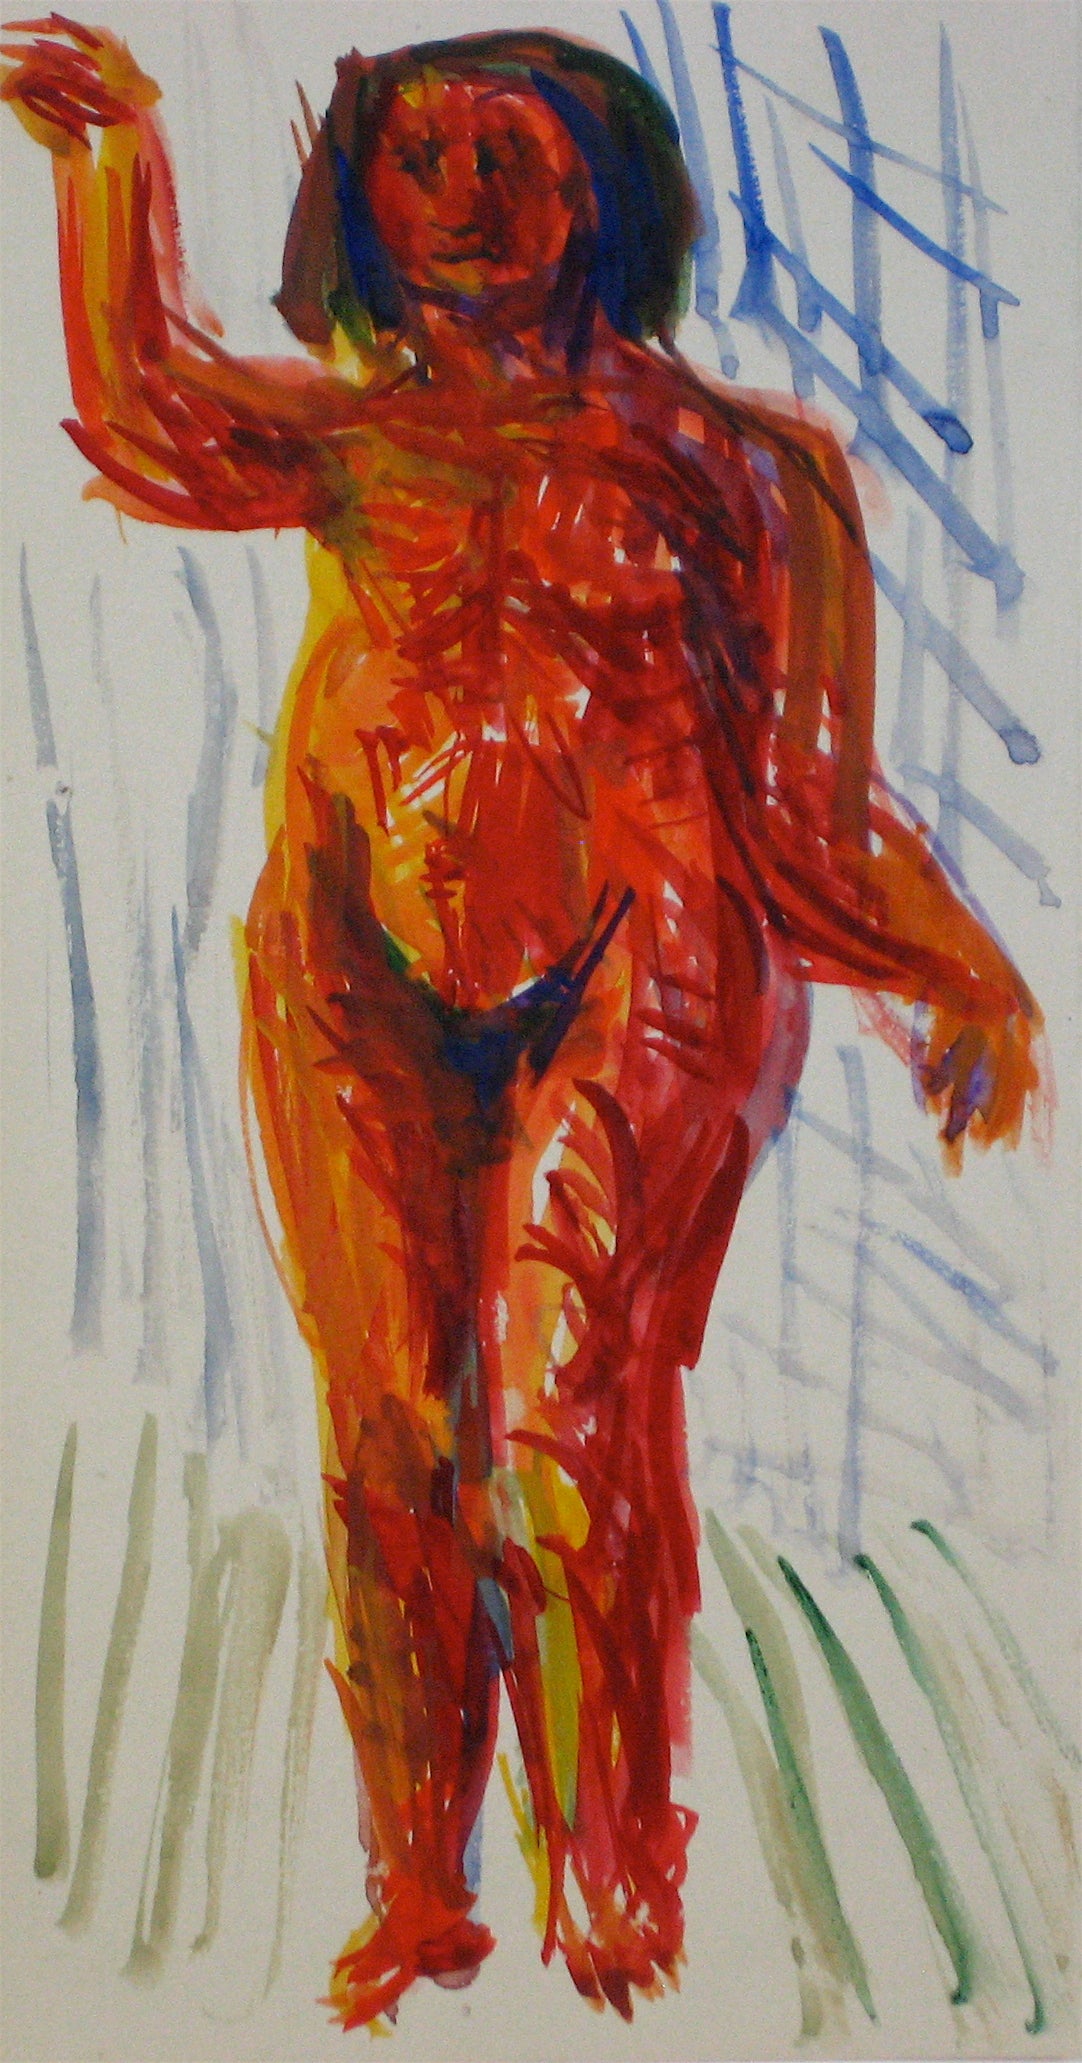 Colorful Expressionist Figure Abstract in Red&lt;br&gt;Early 20th Century Watercolor&lt;br&gt;&lt;br&gt;#11253